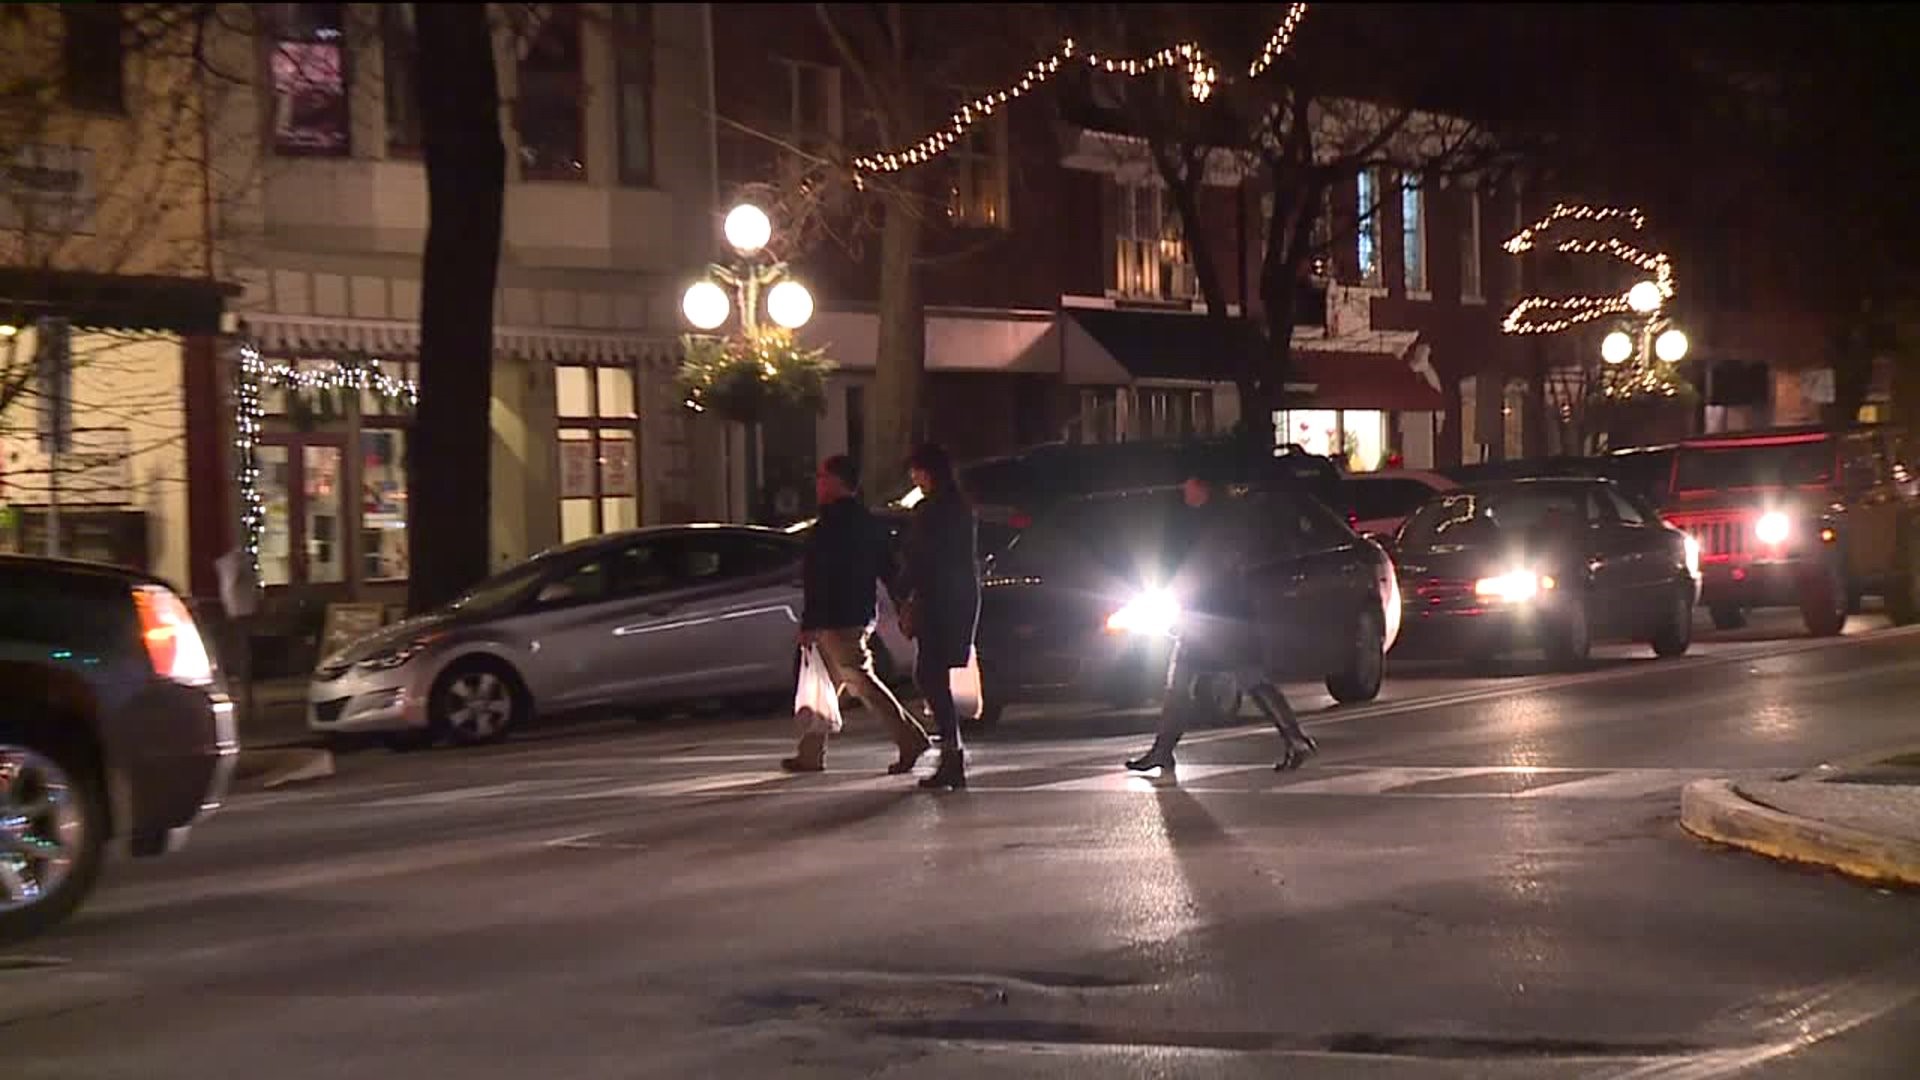 Holiday Shoppers Flock to Downtown Lewisburg for Annual "Late Shoppers Night"